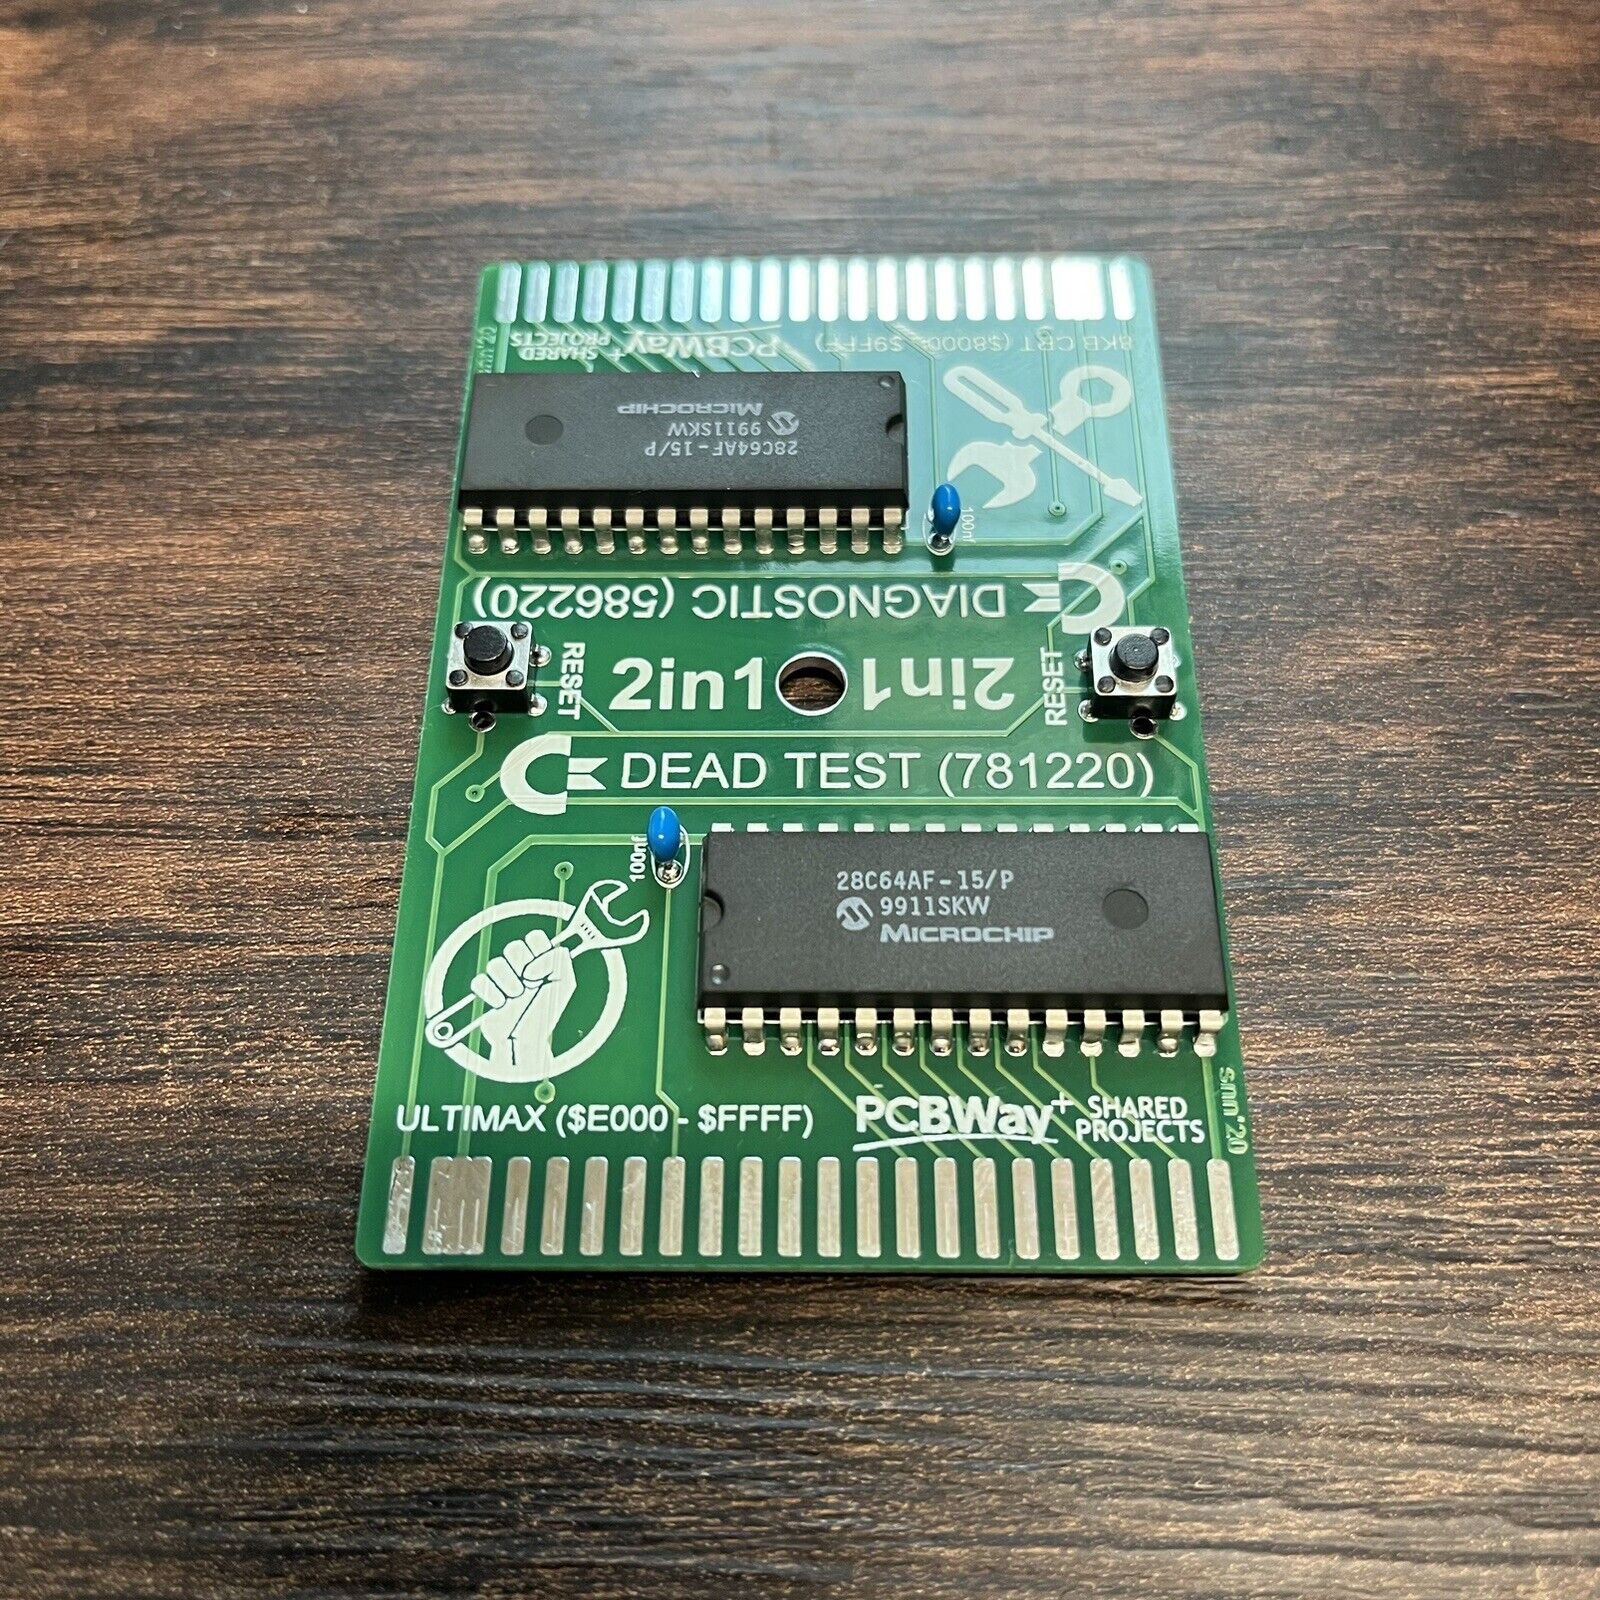 Commodore 64 2in1 Diagnostics & Dead Test Cartridge Fully Assembled